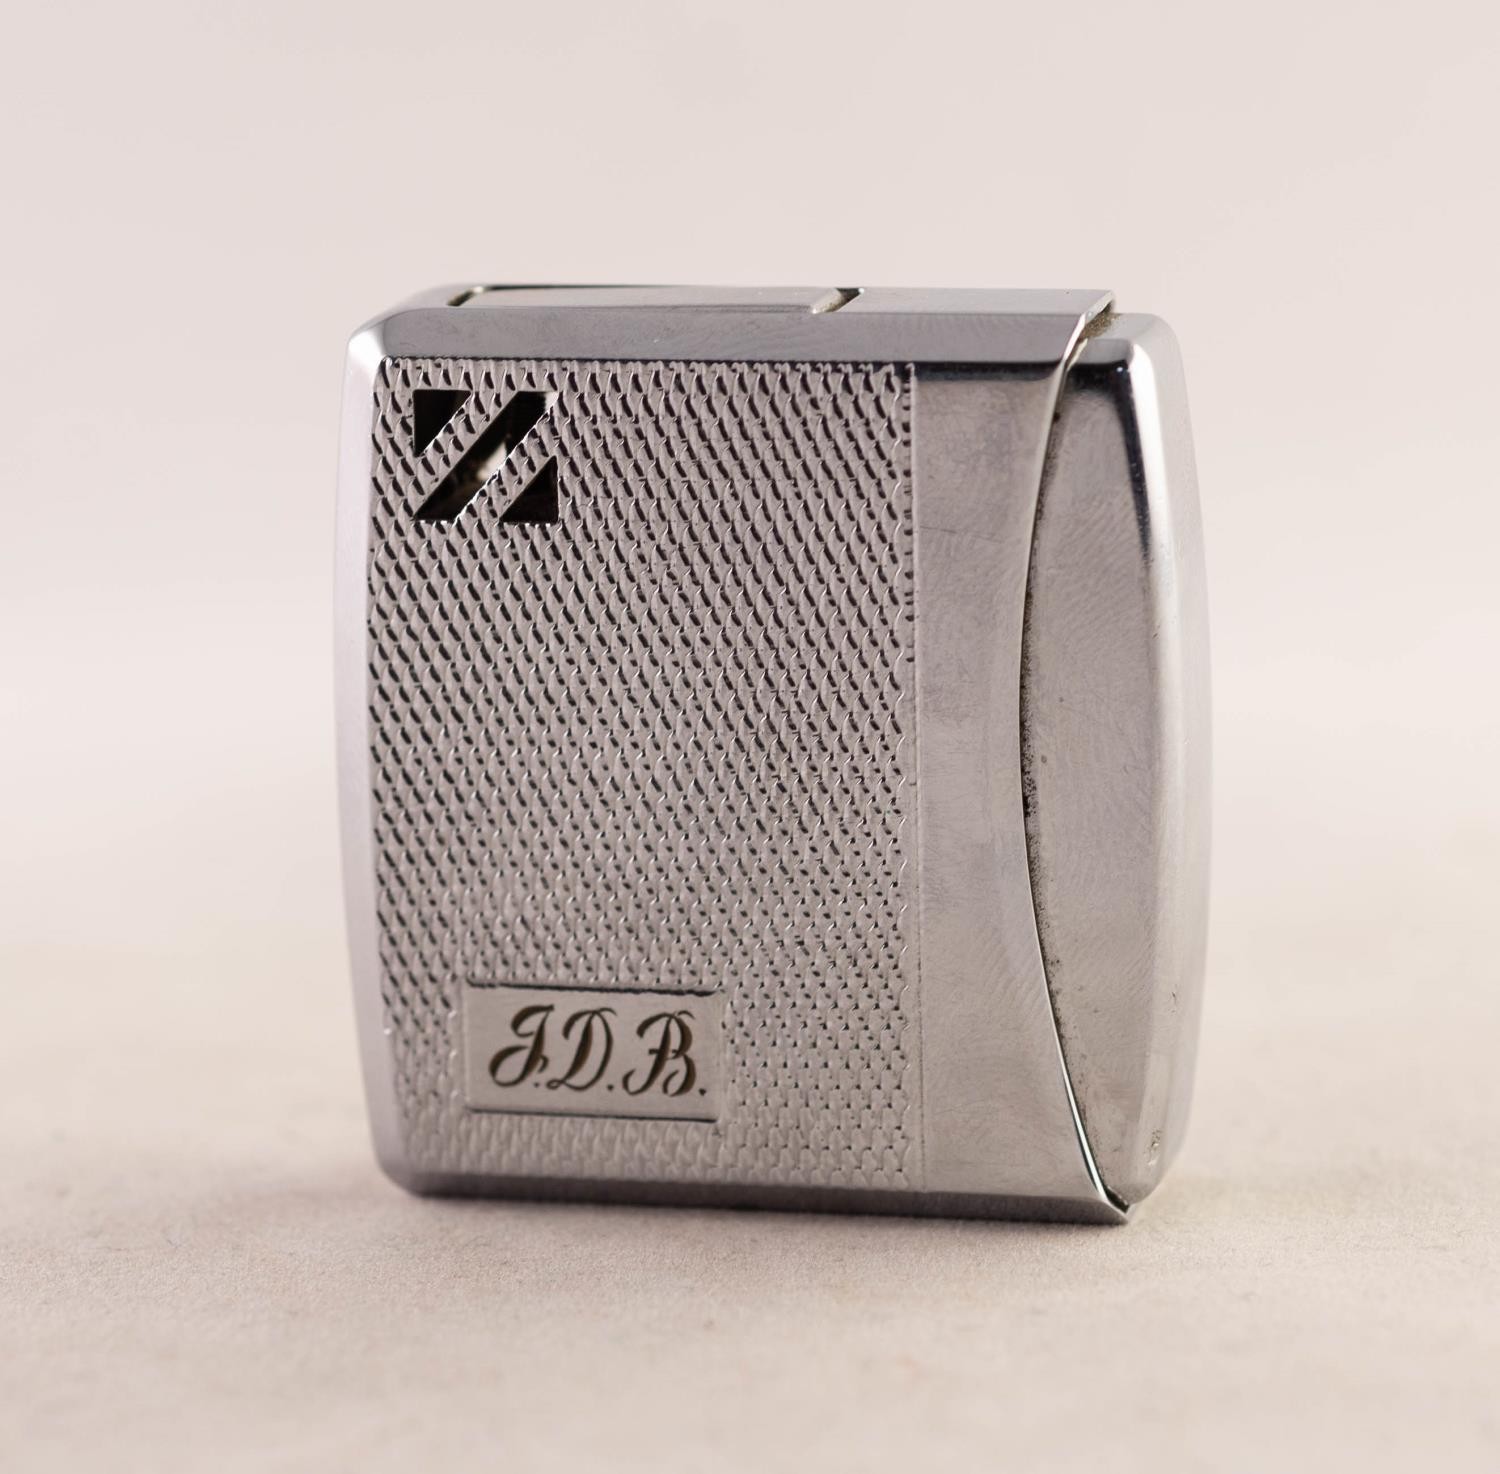 COLIBRI 81 MOLECTRIC CHROMIUM PLATED POCKET CIGARETTE LIGHTER engraved with initials - J.D.B., 1 5/ - Image 2 of 3